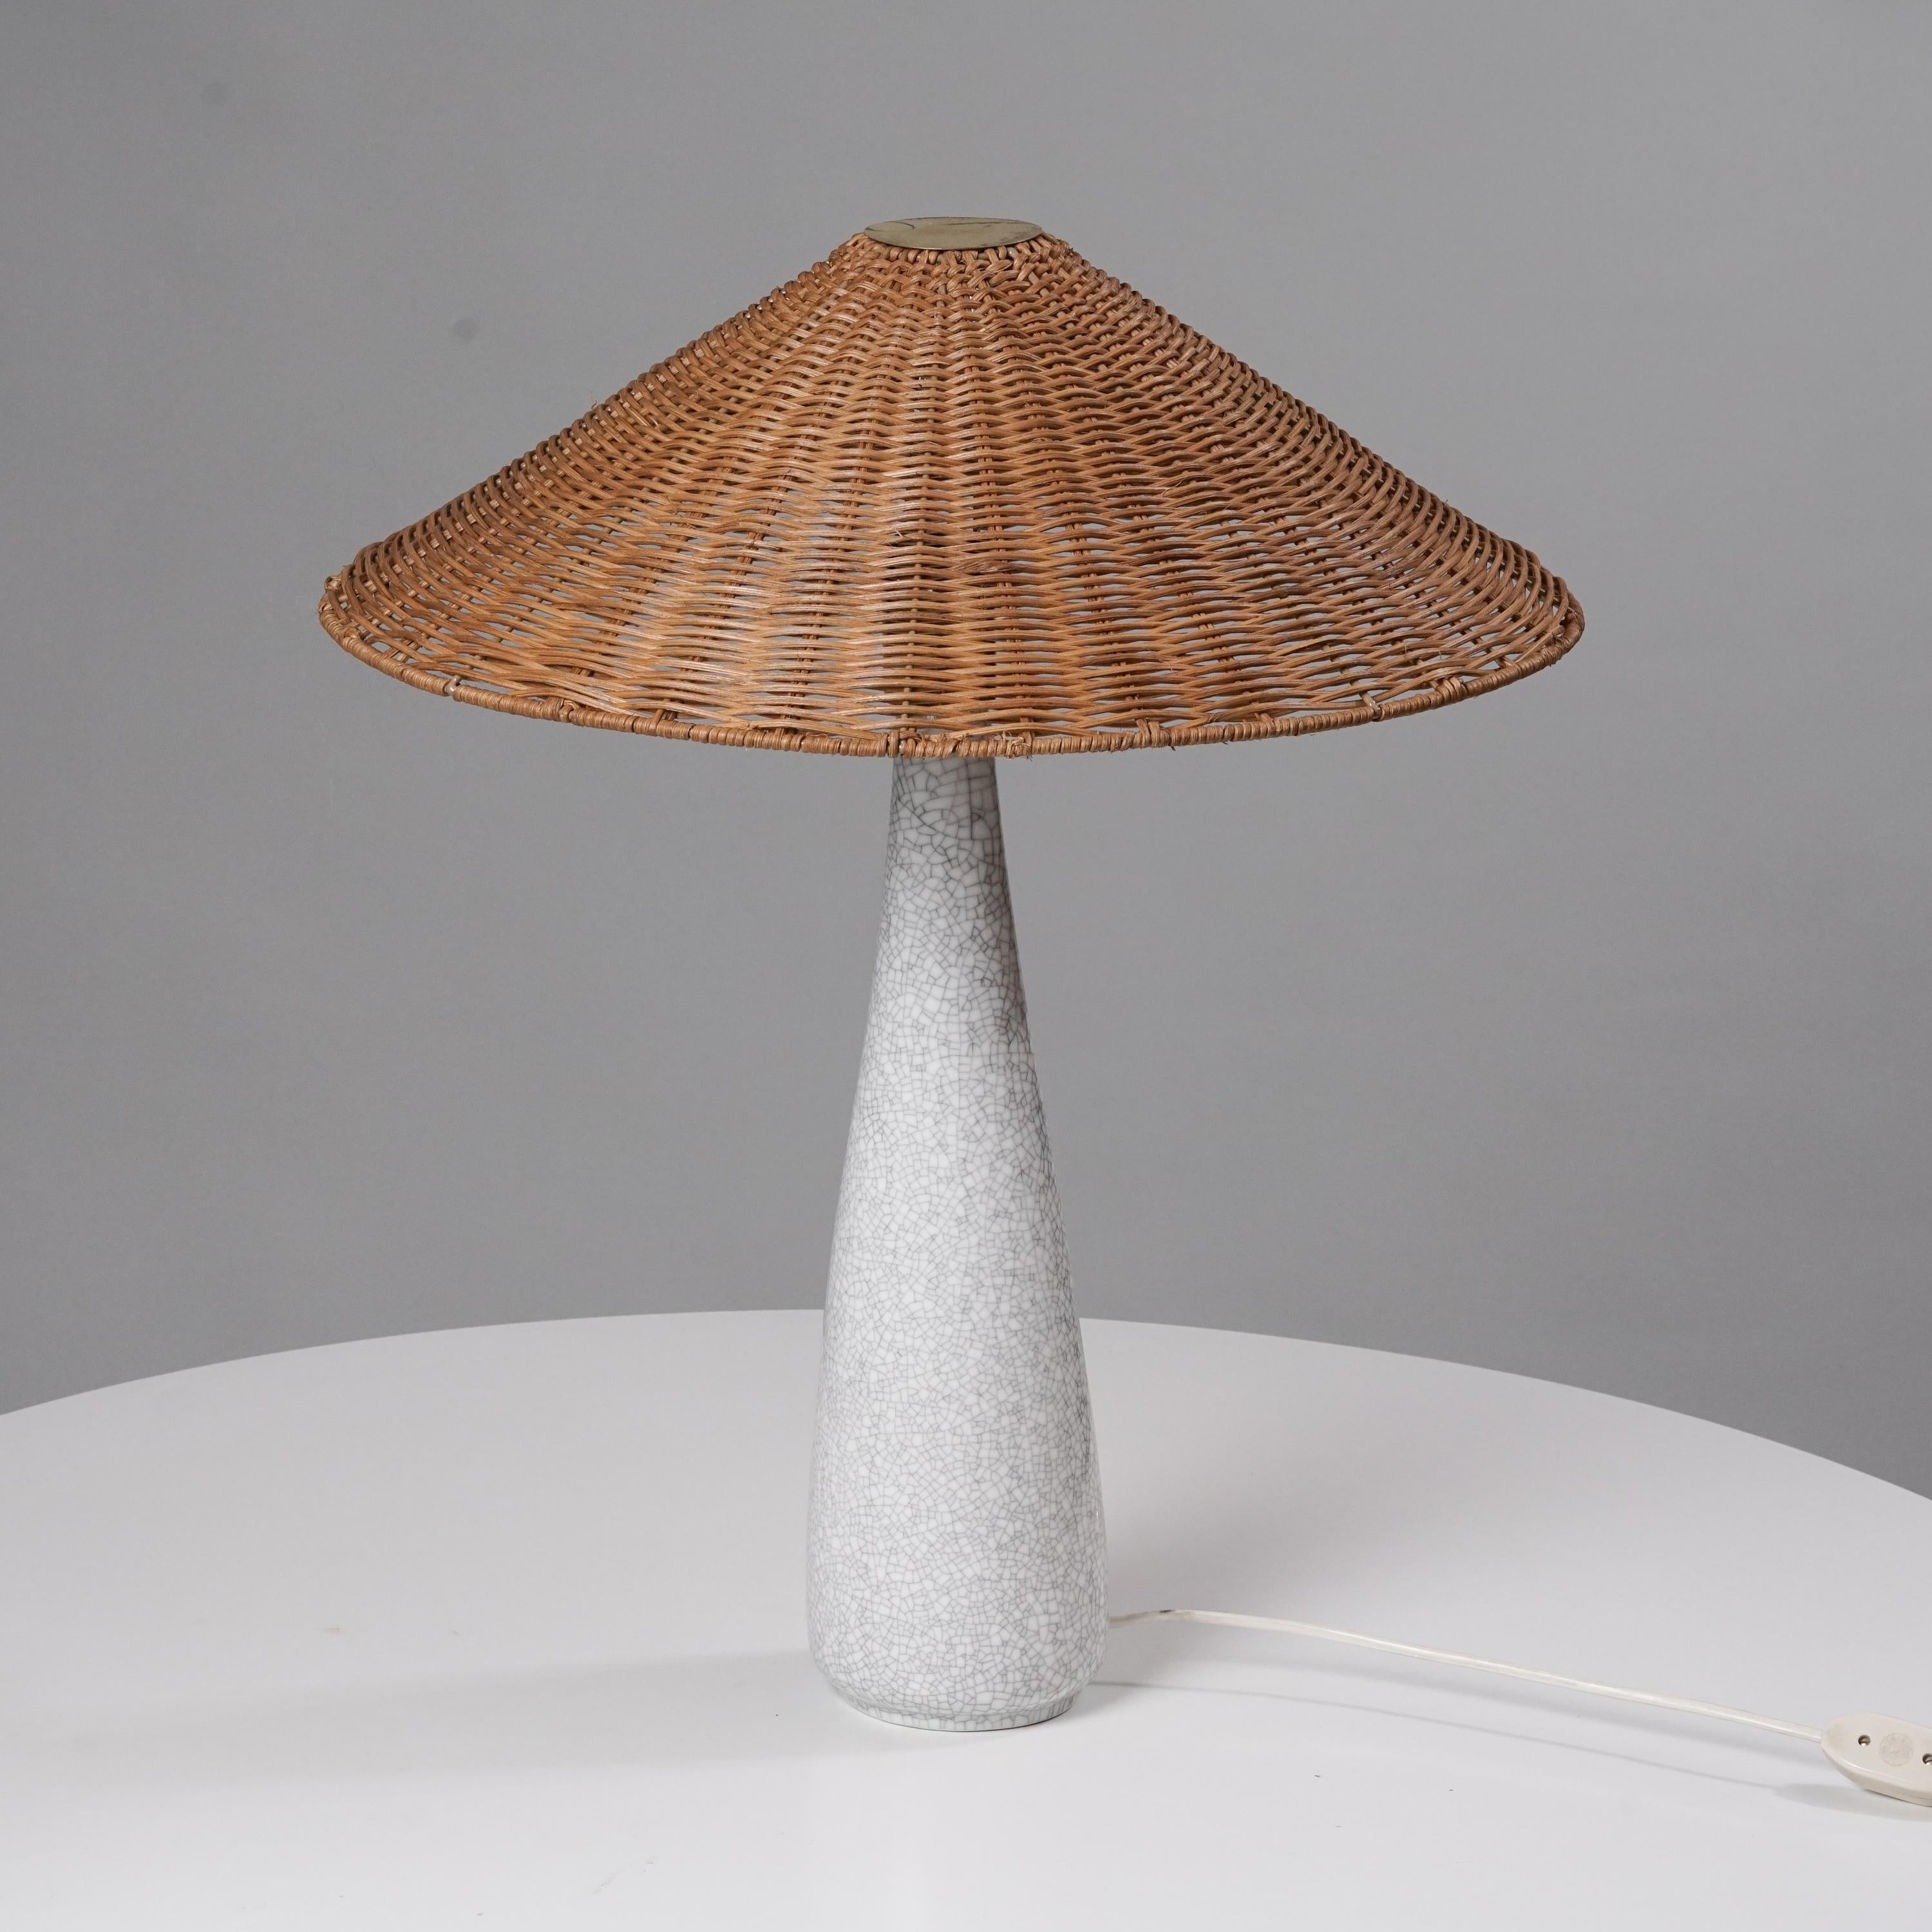 Toini Muona ceramic glazed table lamp, manufactured by Arabia, 1950s. Wicker shade, brass details. Marked. Good vintage condition, minor patina consistent with age and use. 

Toini Muona was a pioneer of modernism. Muona represented the sharpest